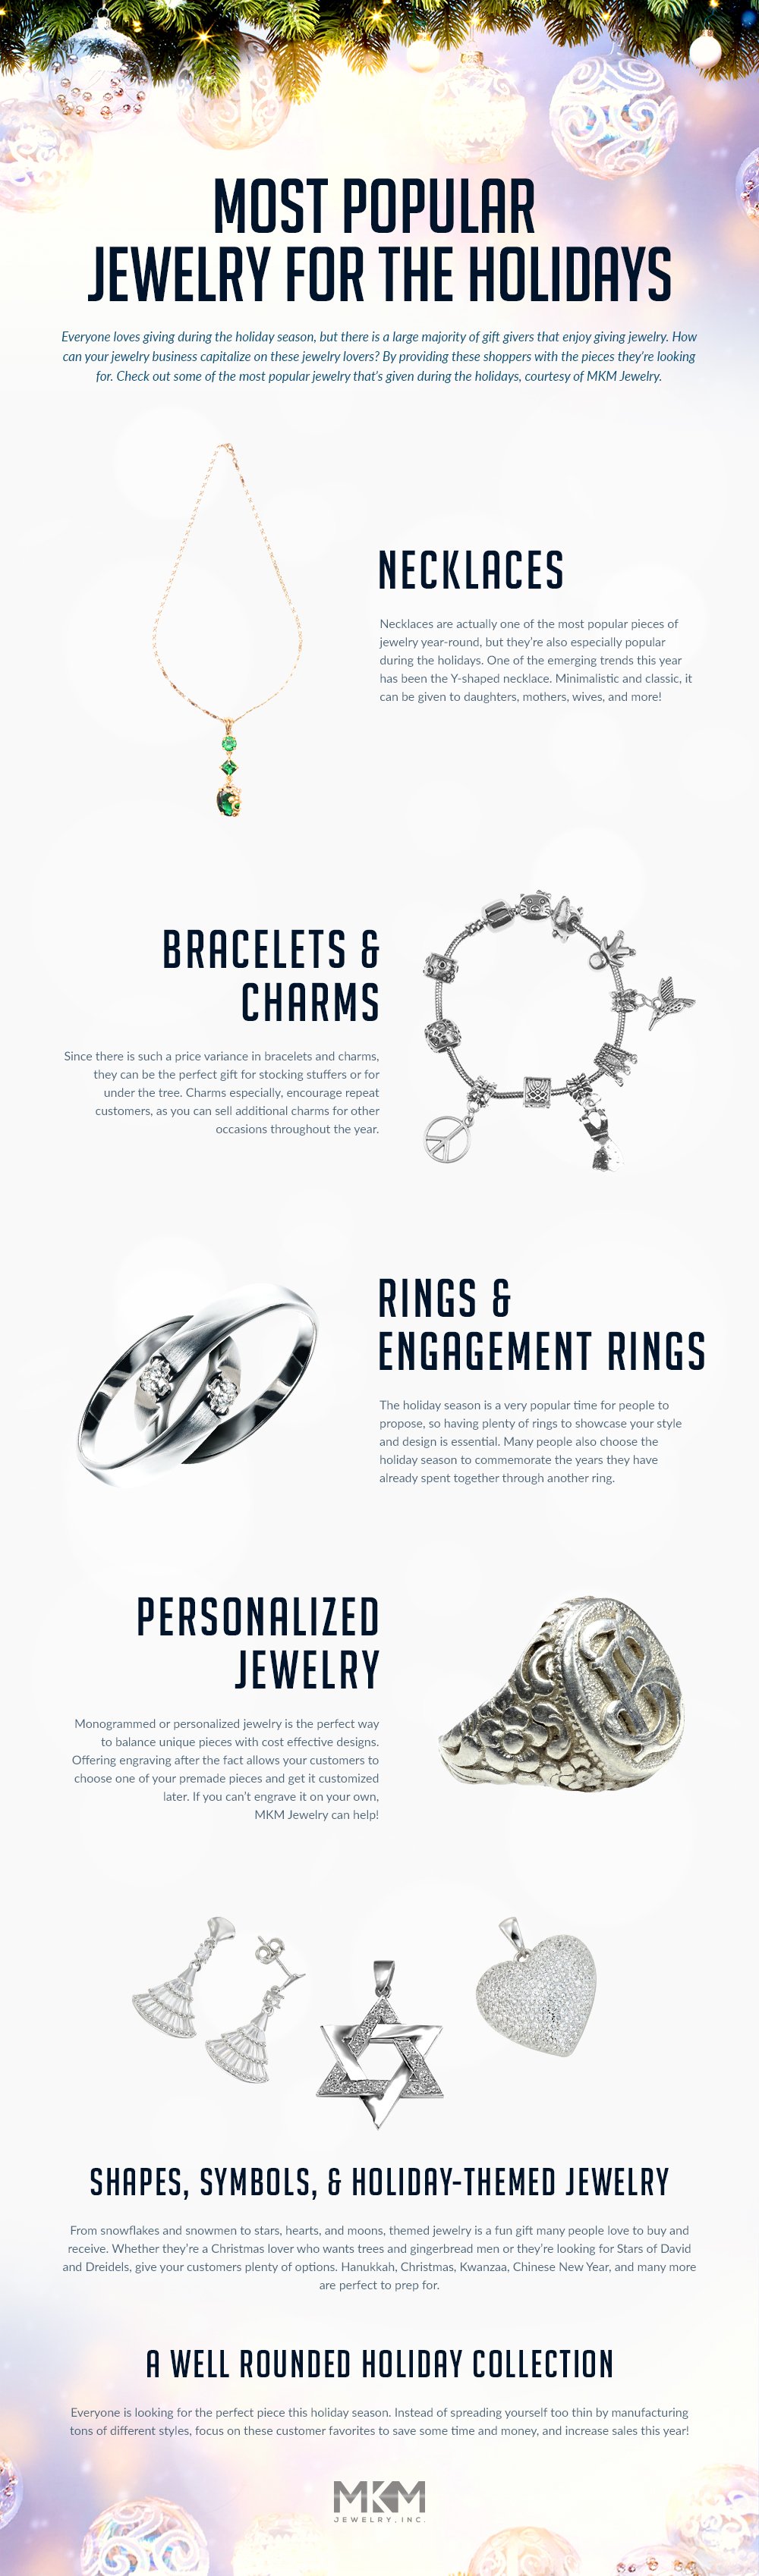 Most Popular Jewelry for the Holidays